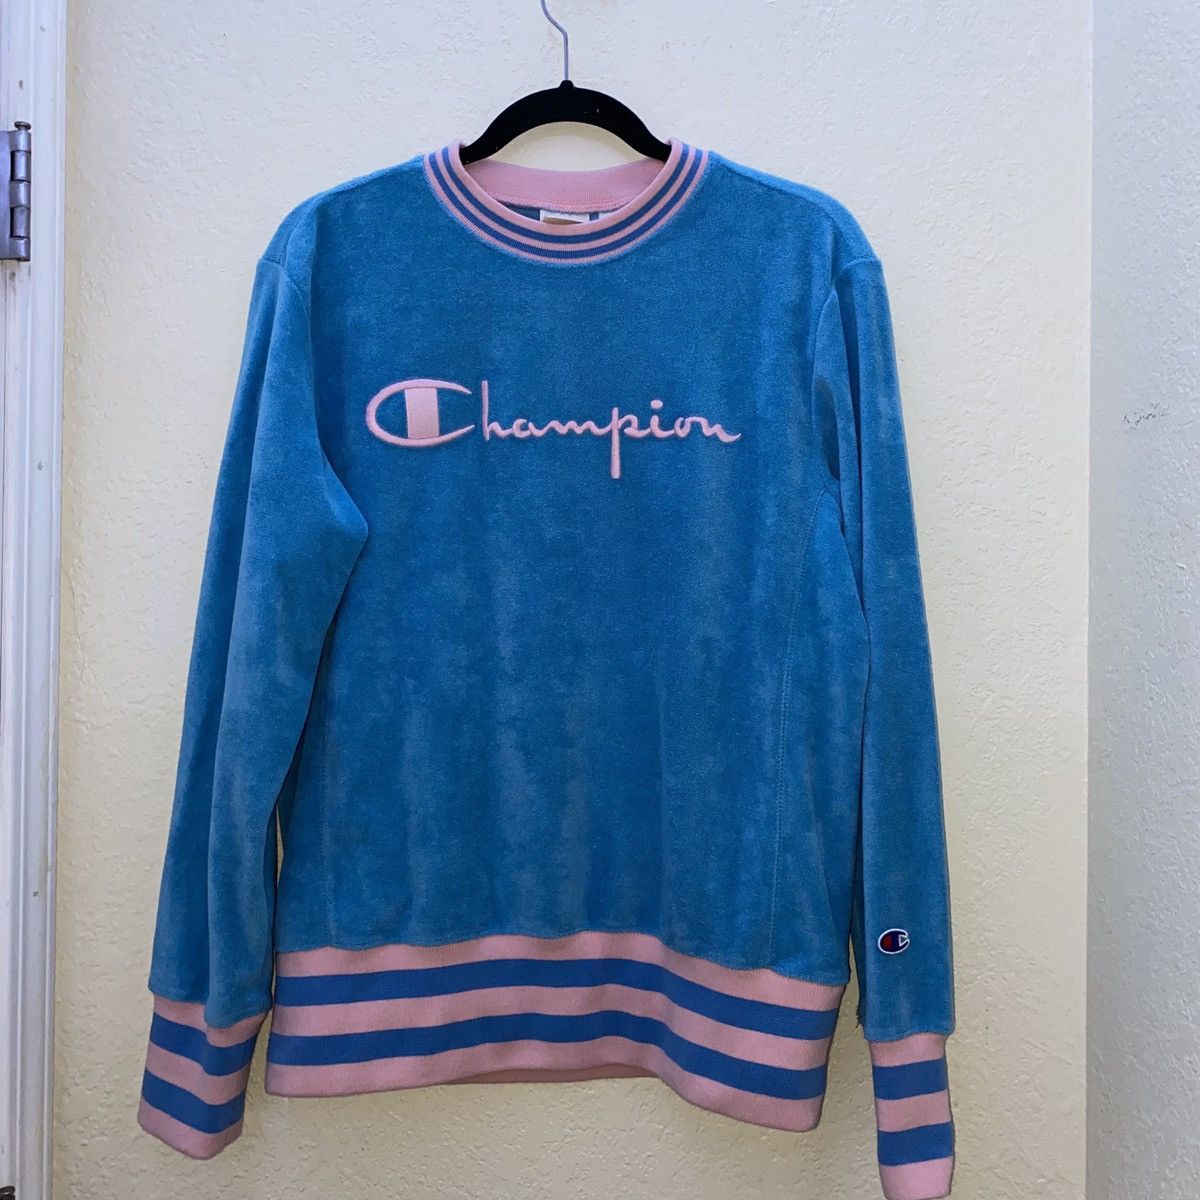 Champion Campion toweling sweater Size US M / EU 48-50 / 2 - 2 Preview